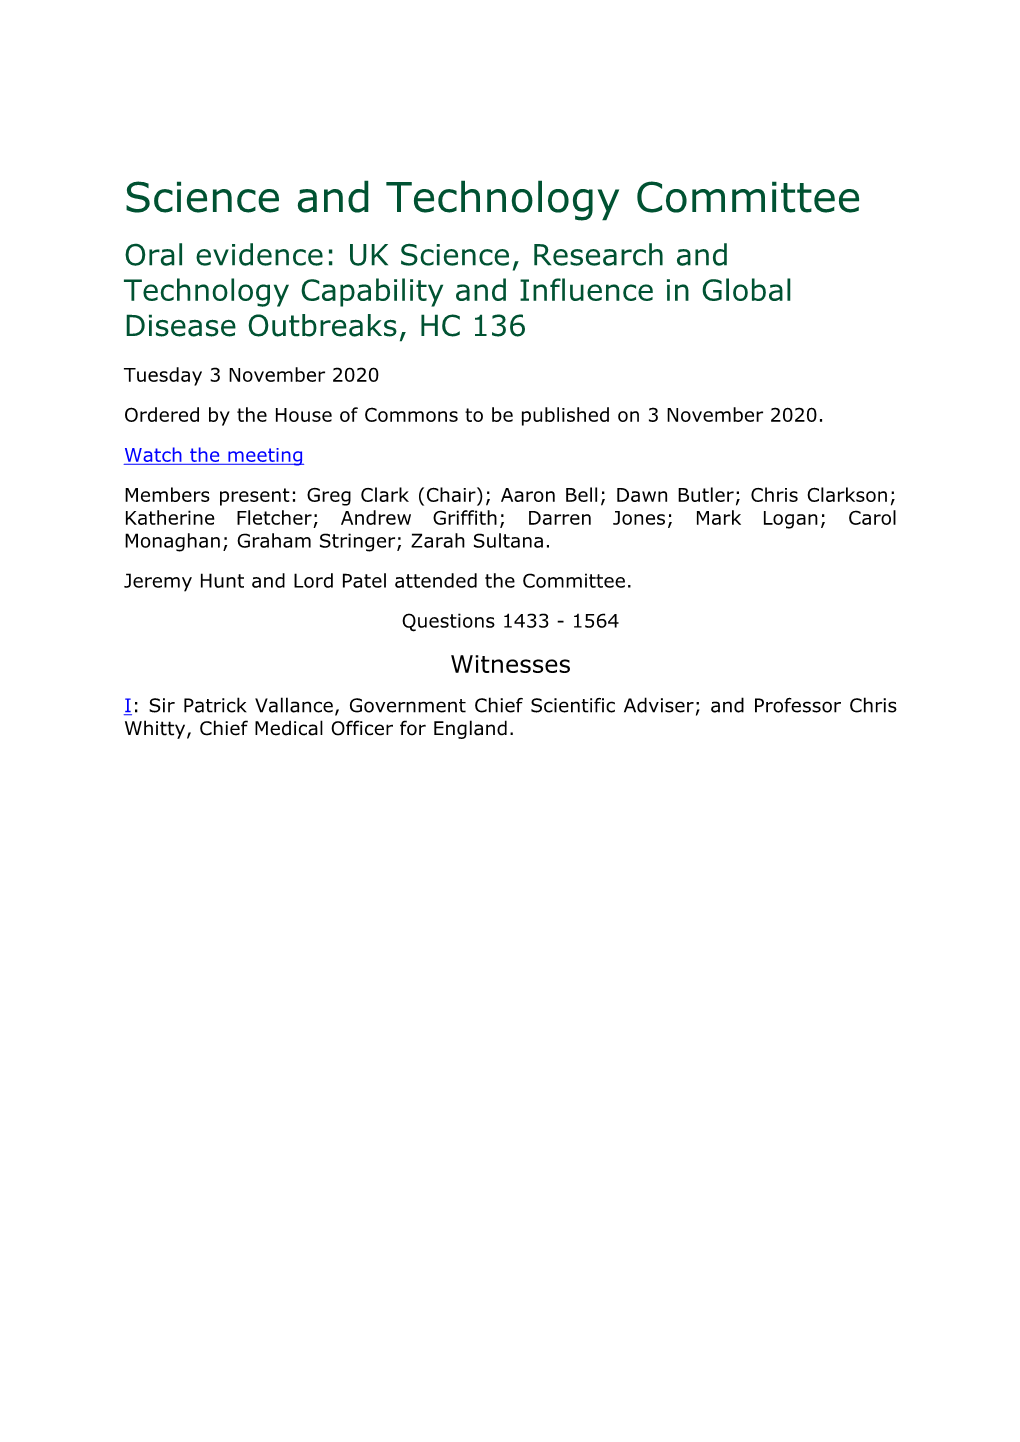 Science and Technology Committee Oral Evidence: UK Science, Research and Technology Capability and Influence in Global Disease Outbreaks, HC 136